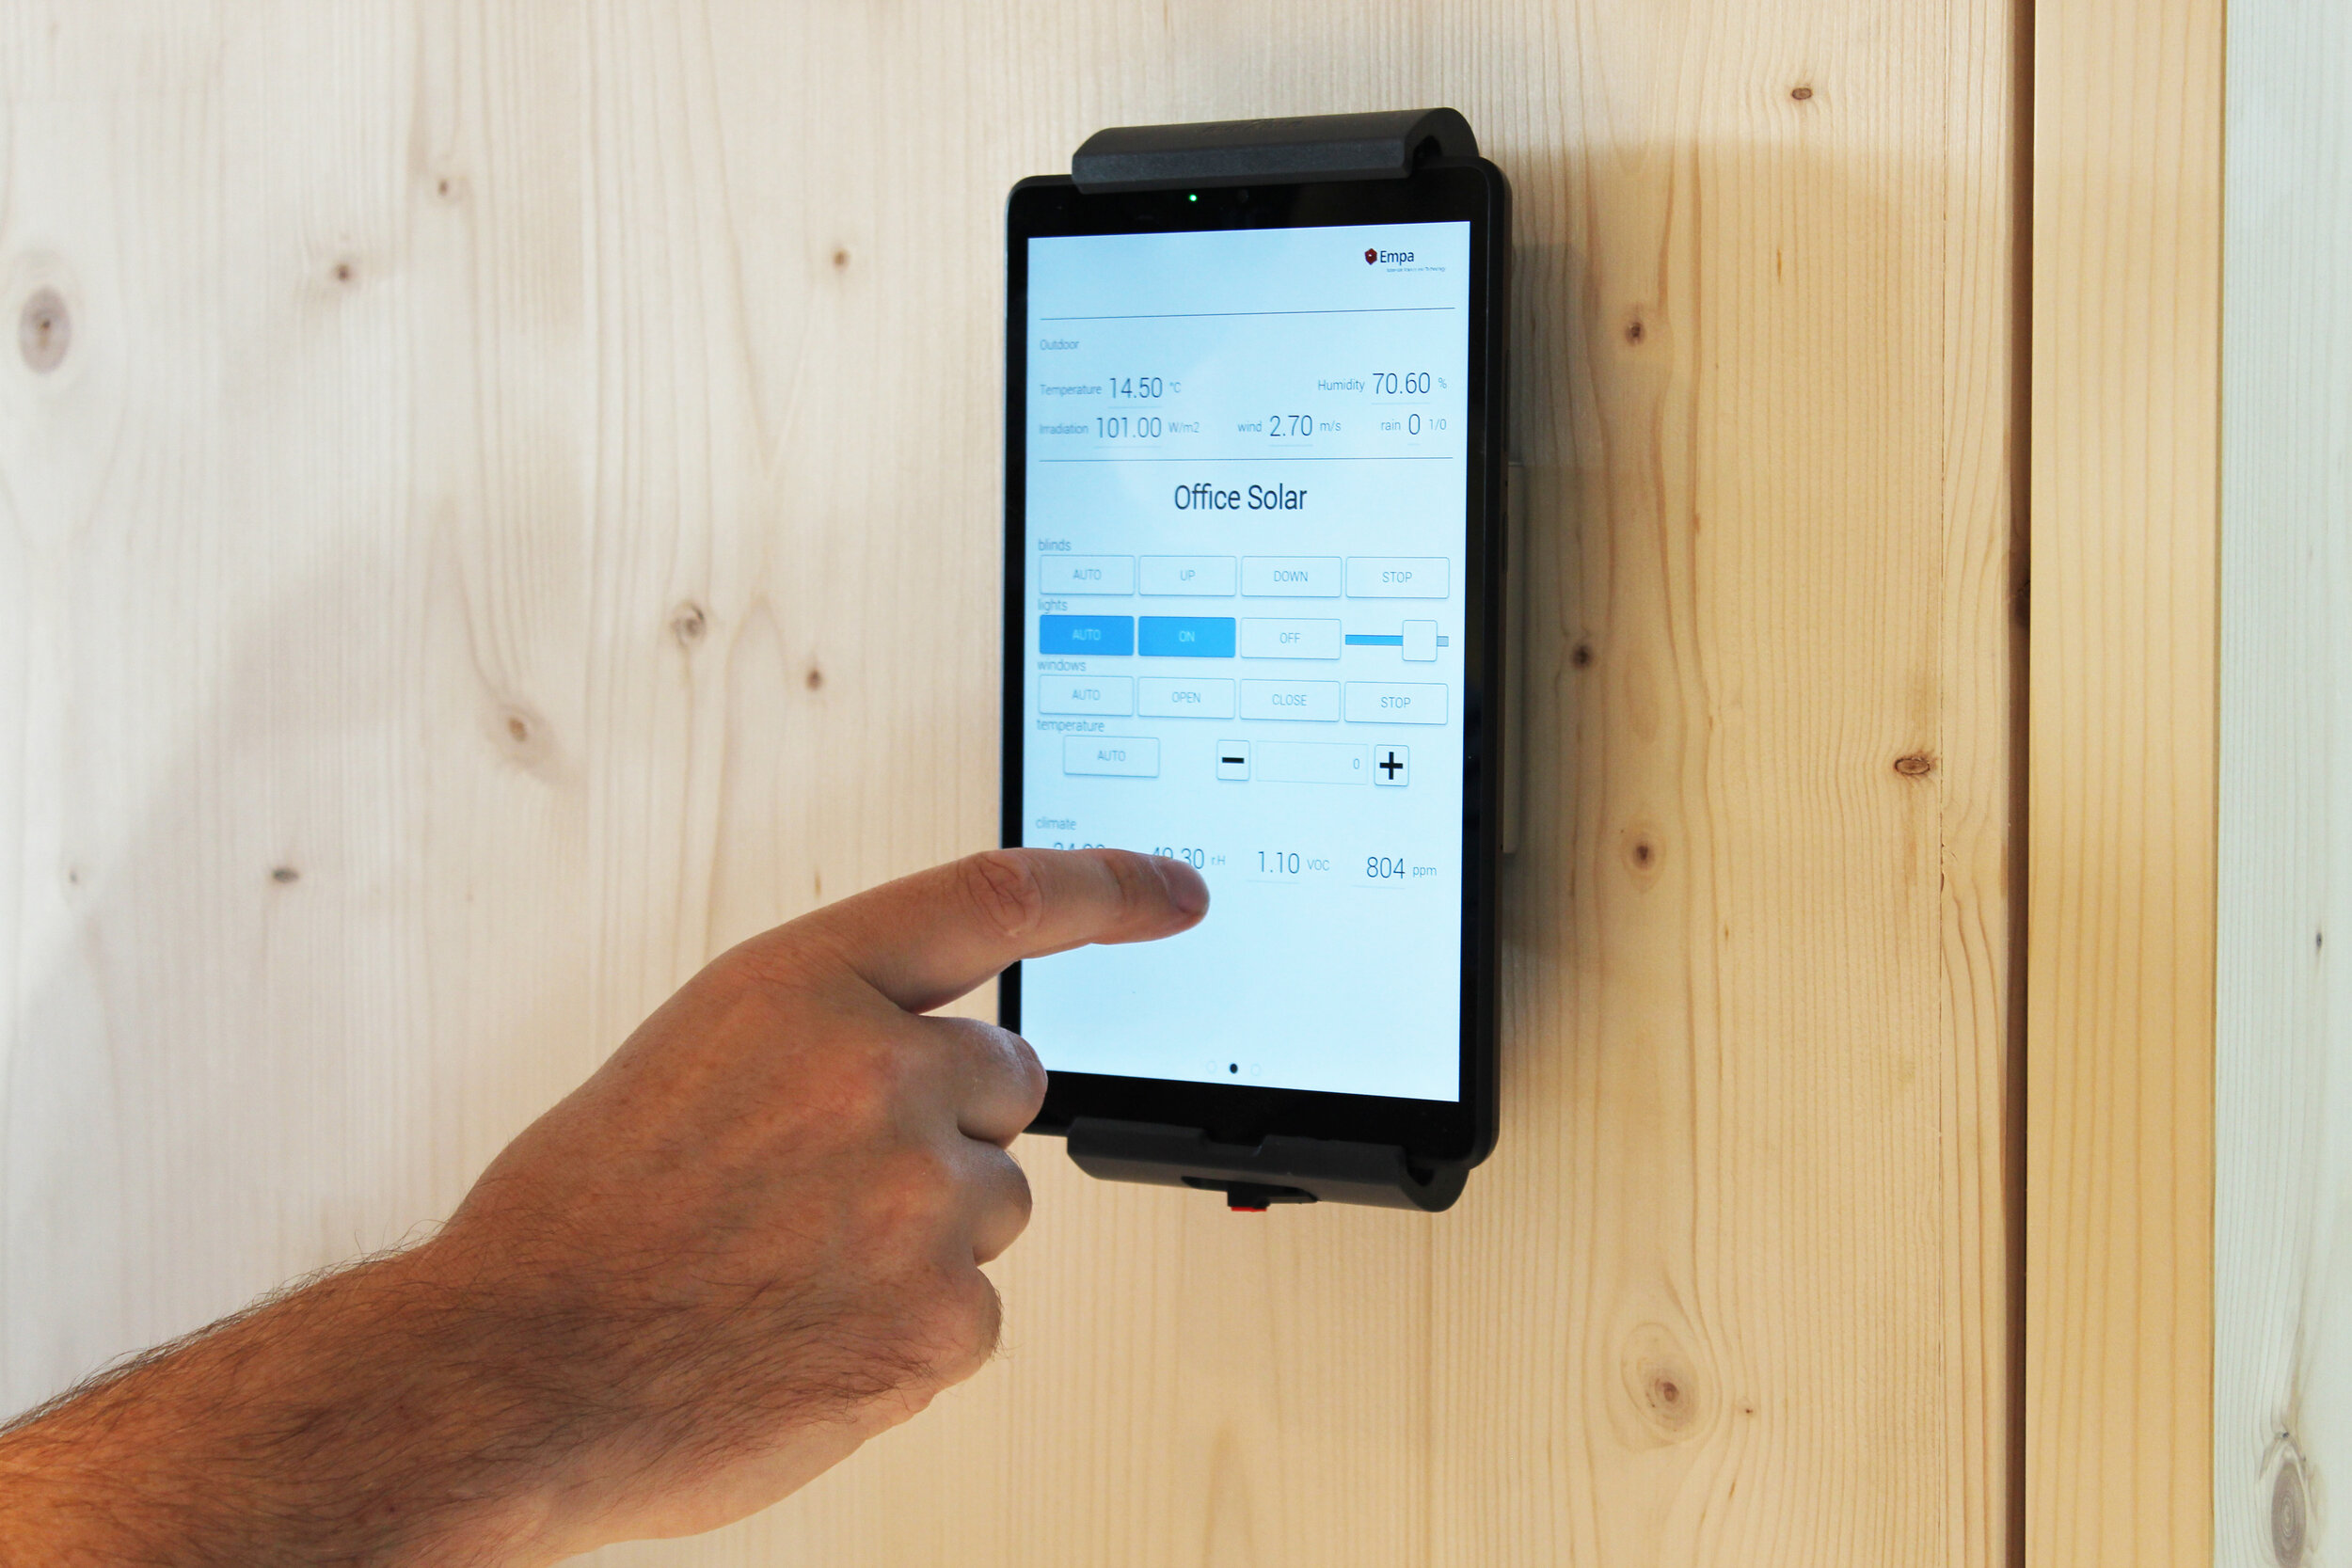 Users can control the indoor climate via a tablet. Photo: ETH Zurich / Architecture and Building Systems (Copy)